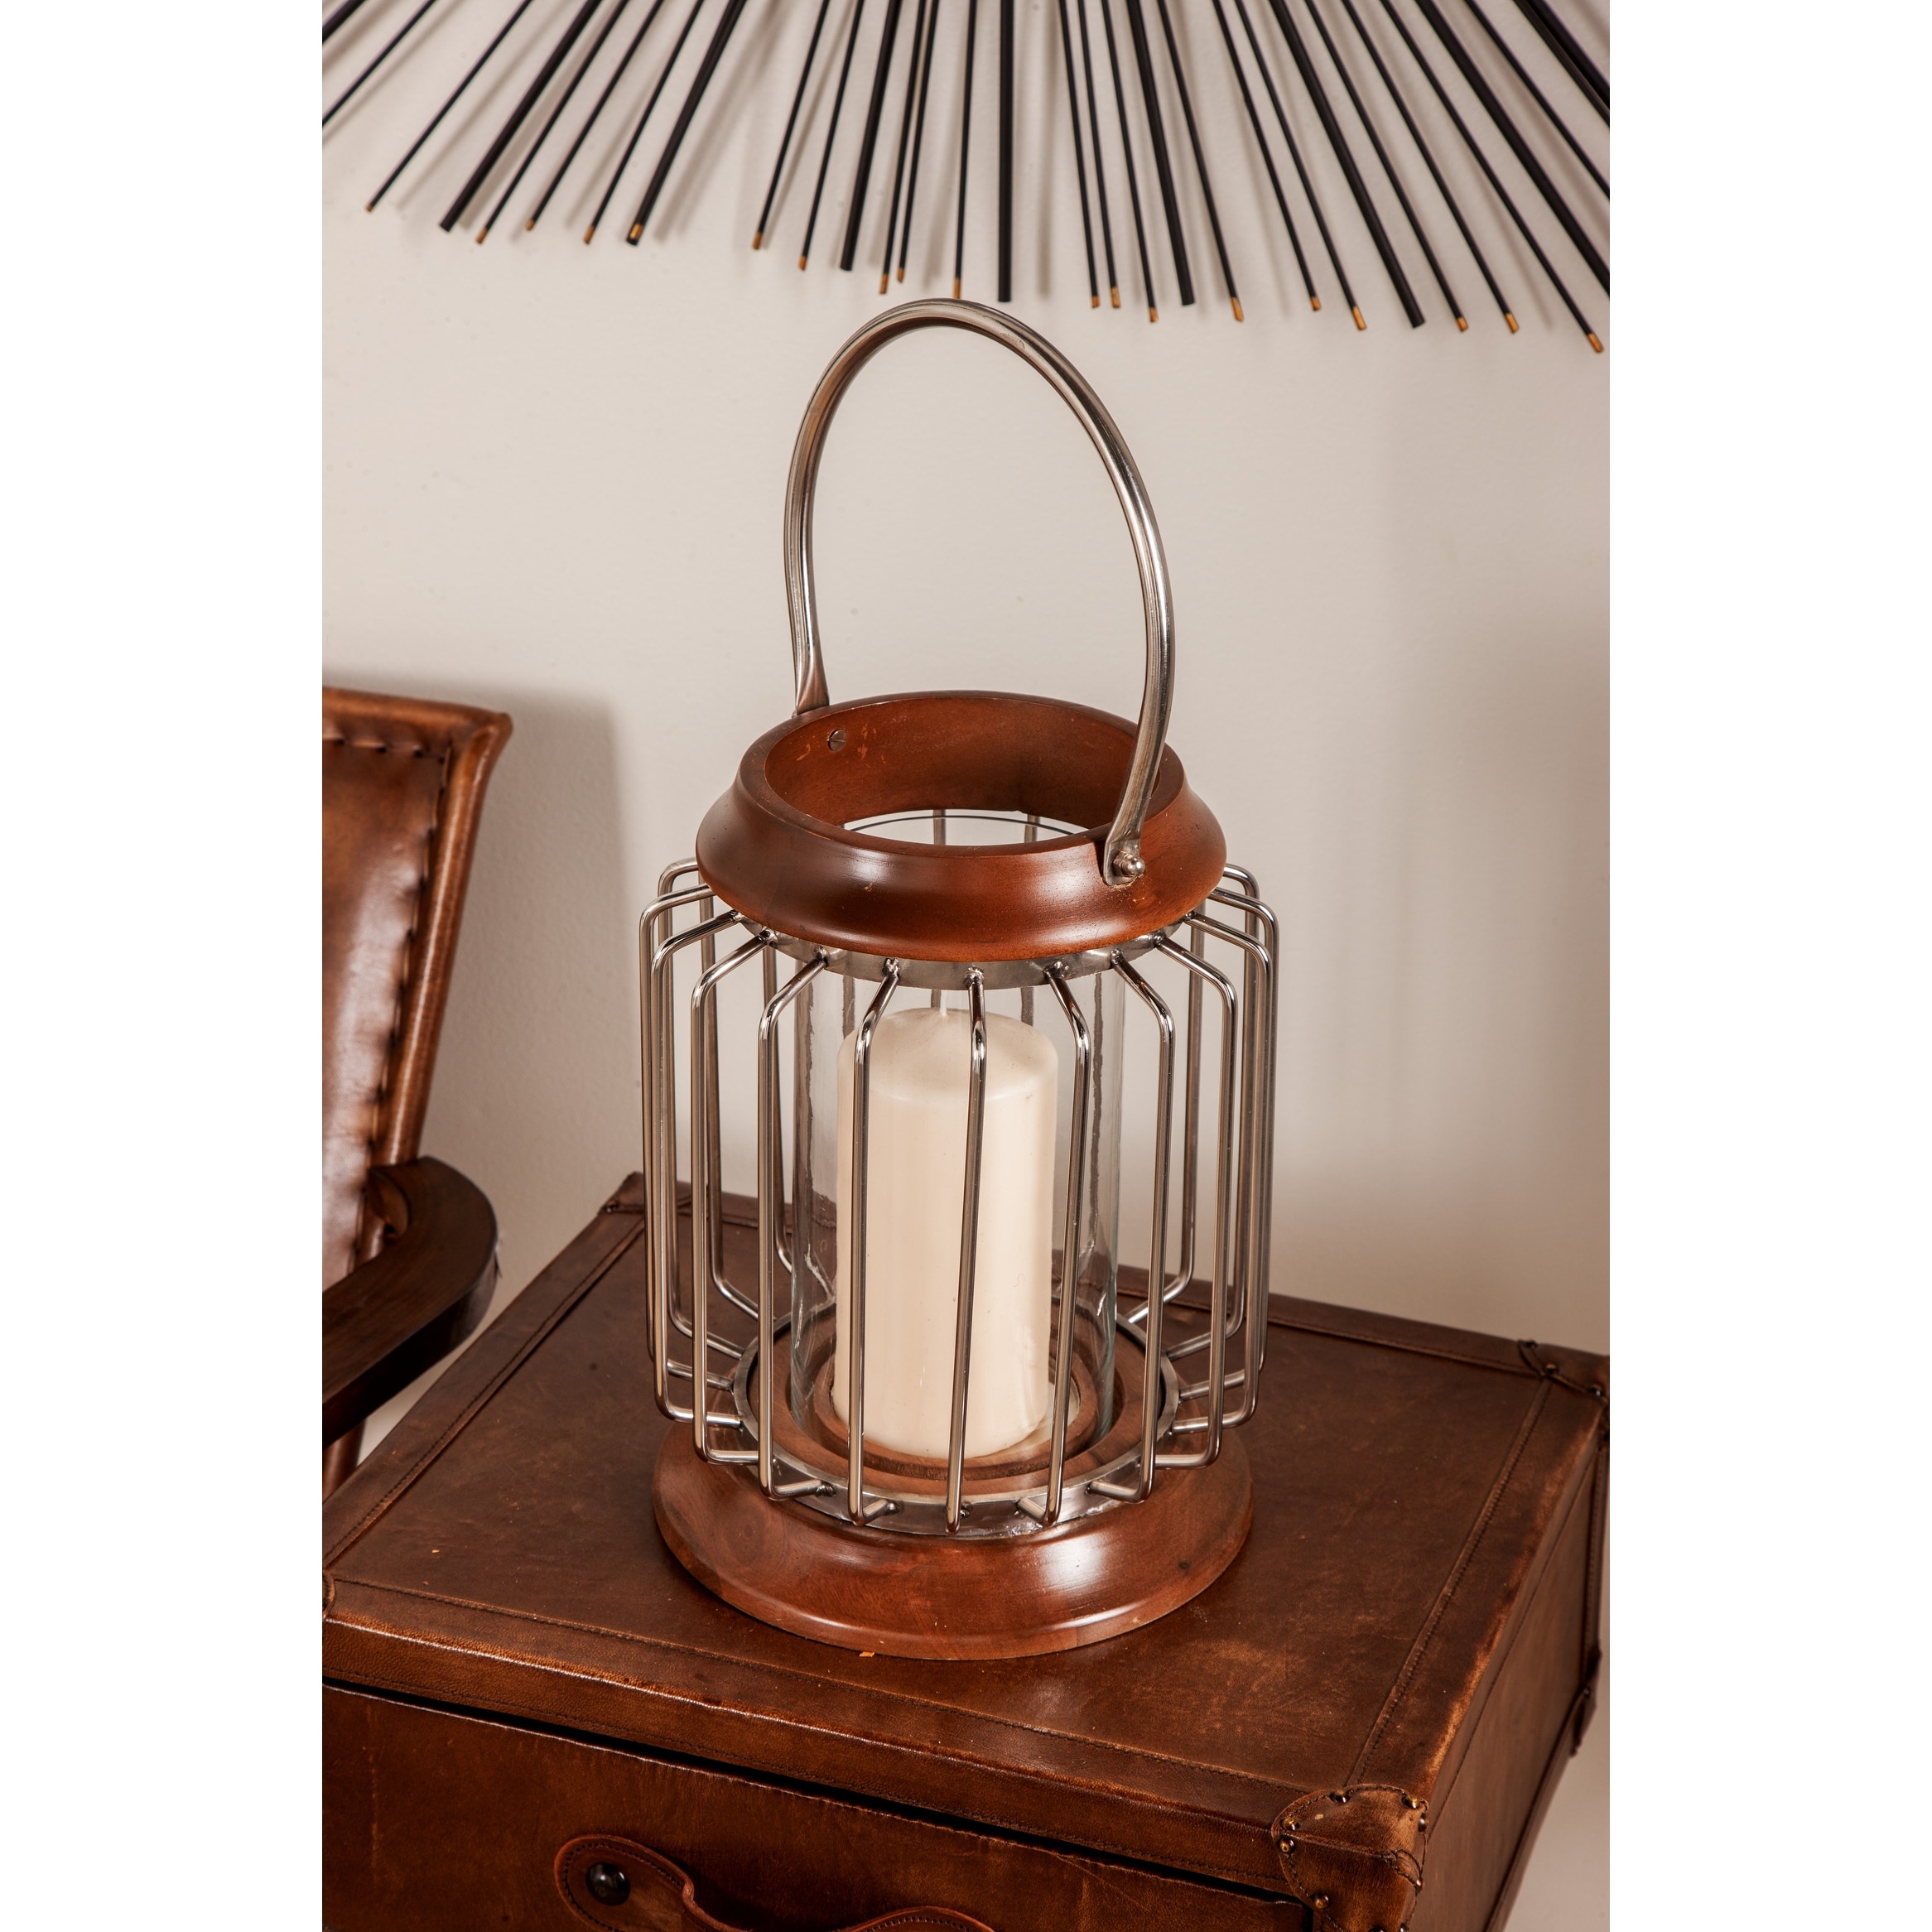 https://ak1.ostkcdn.com/images/products/is/images/direct/0836f6ba3589df294ea9c666bc874c79056e3e7a/Large-Wood-%26-Metal-Bar-Hanging-Lantern-with-Handle-%26-Hurricane-Glass-Candle-Holder%2C-9%22-x-11%22.jpg